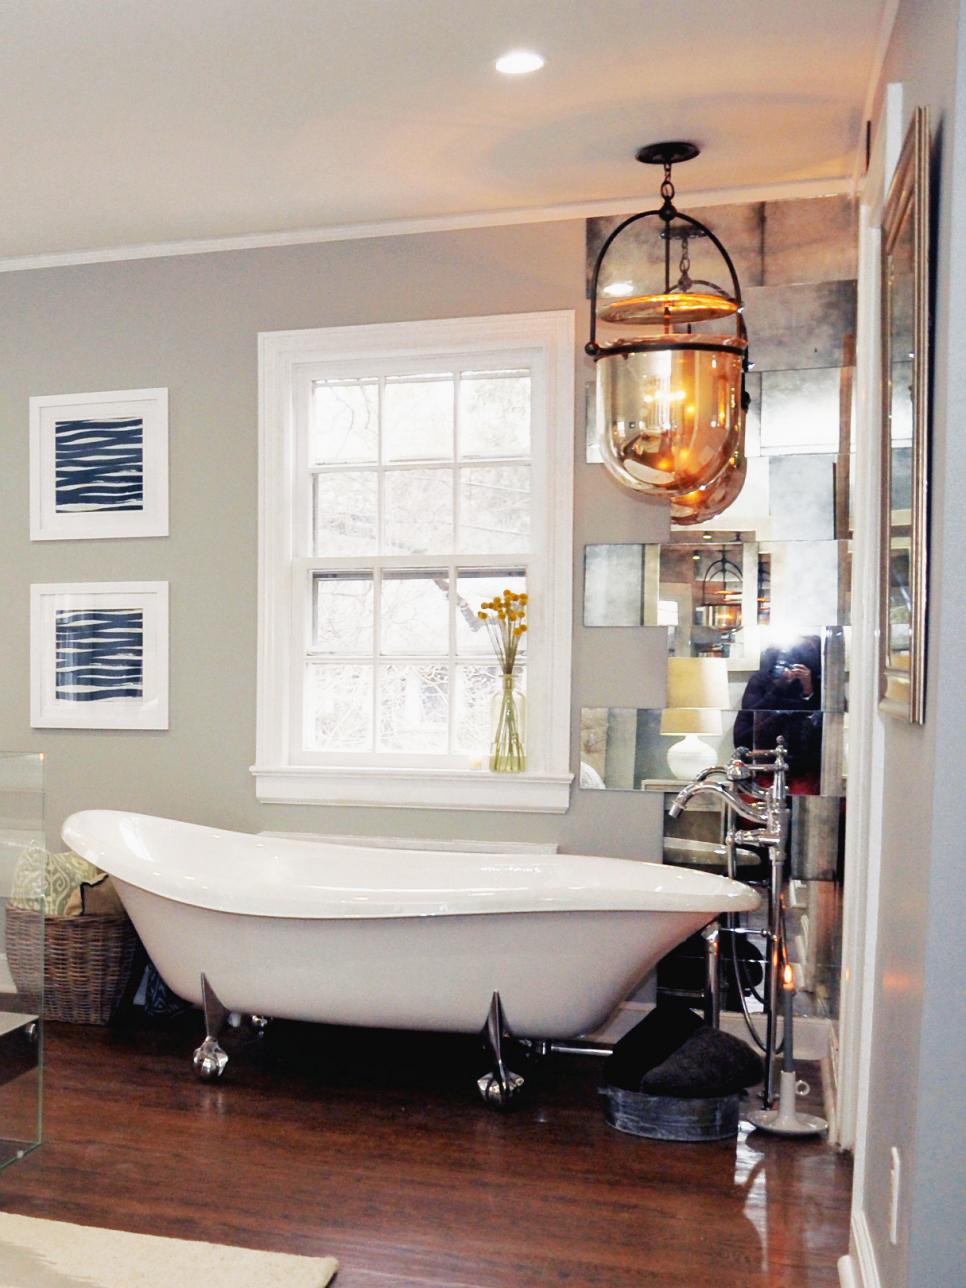 Neutral Bathroom With Clawfoot Tub, Mirrored Wall and Pendant Light